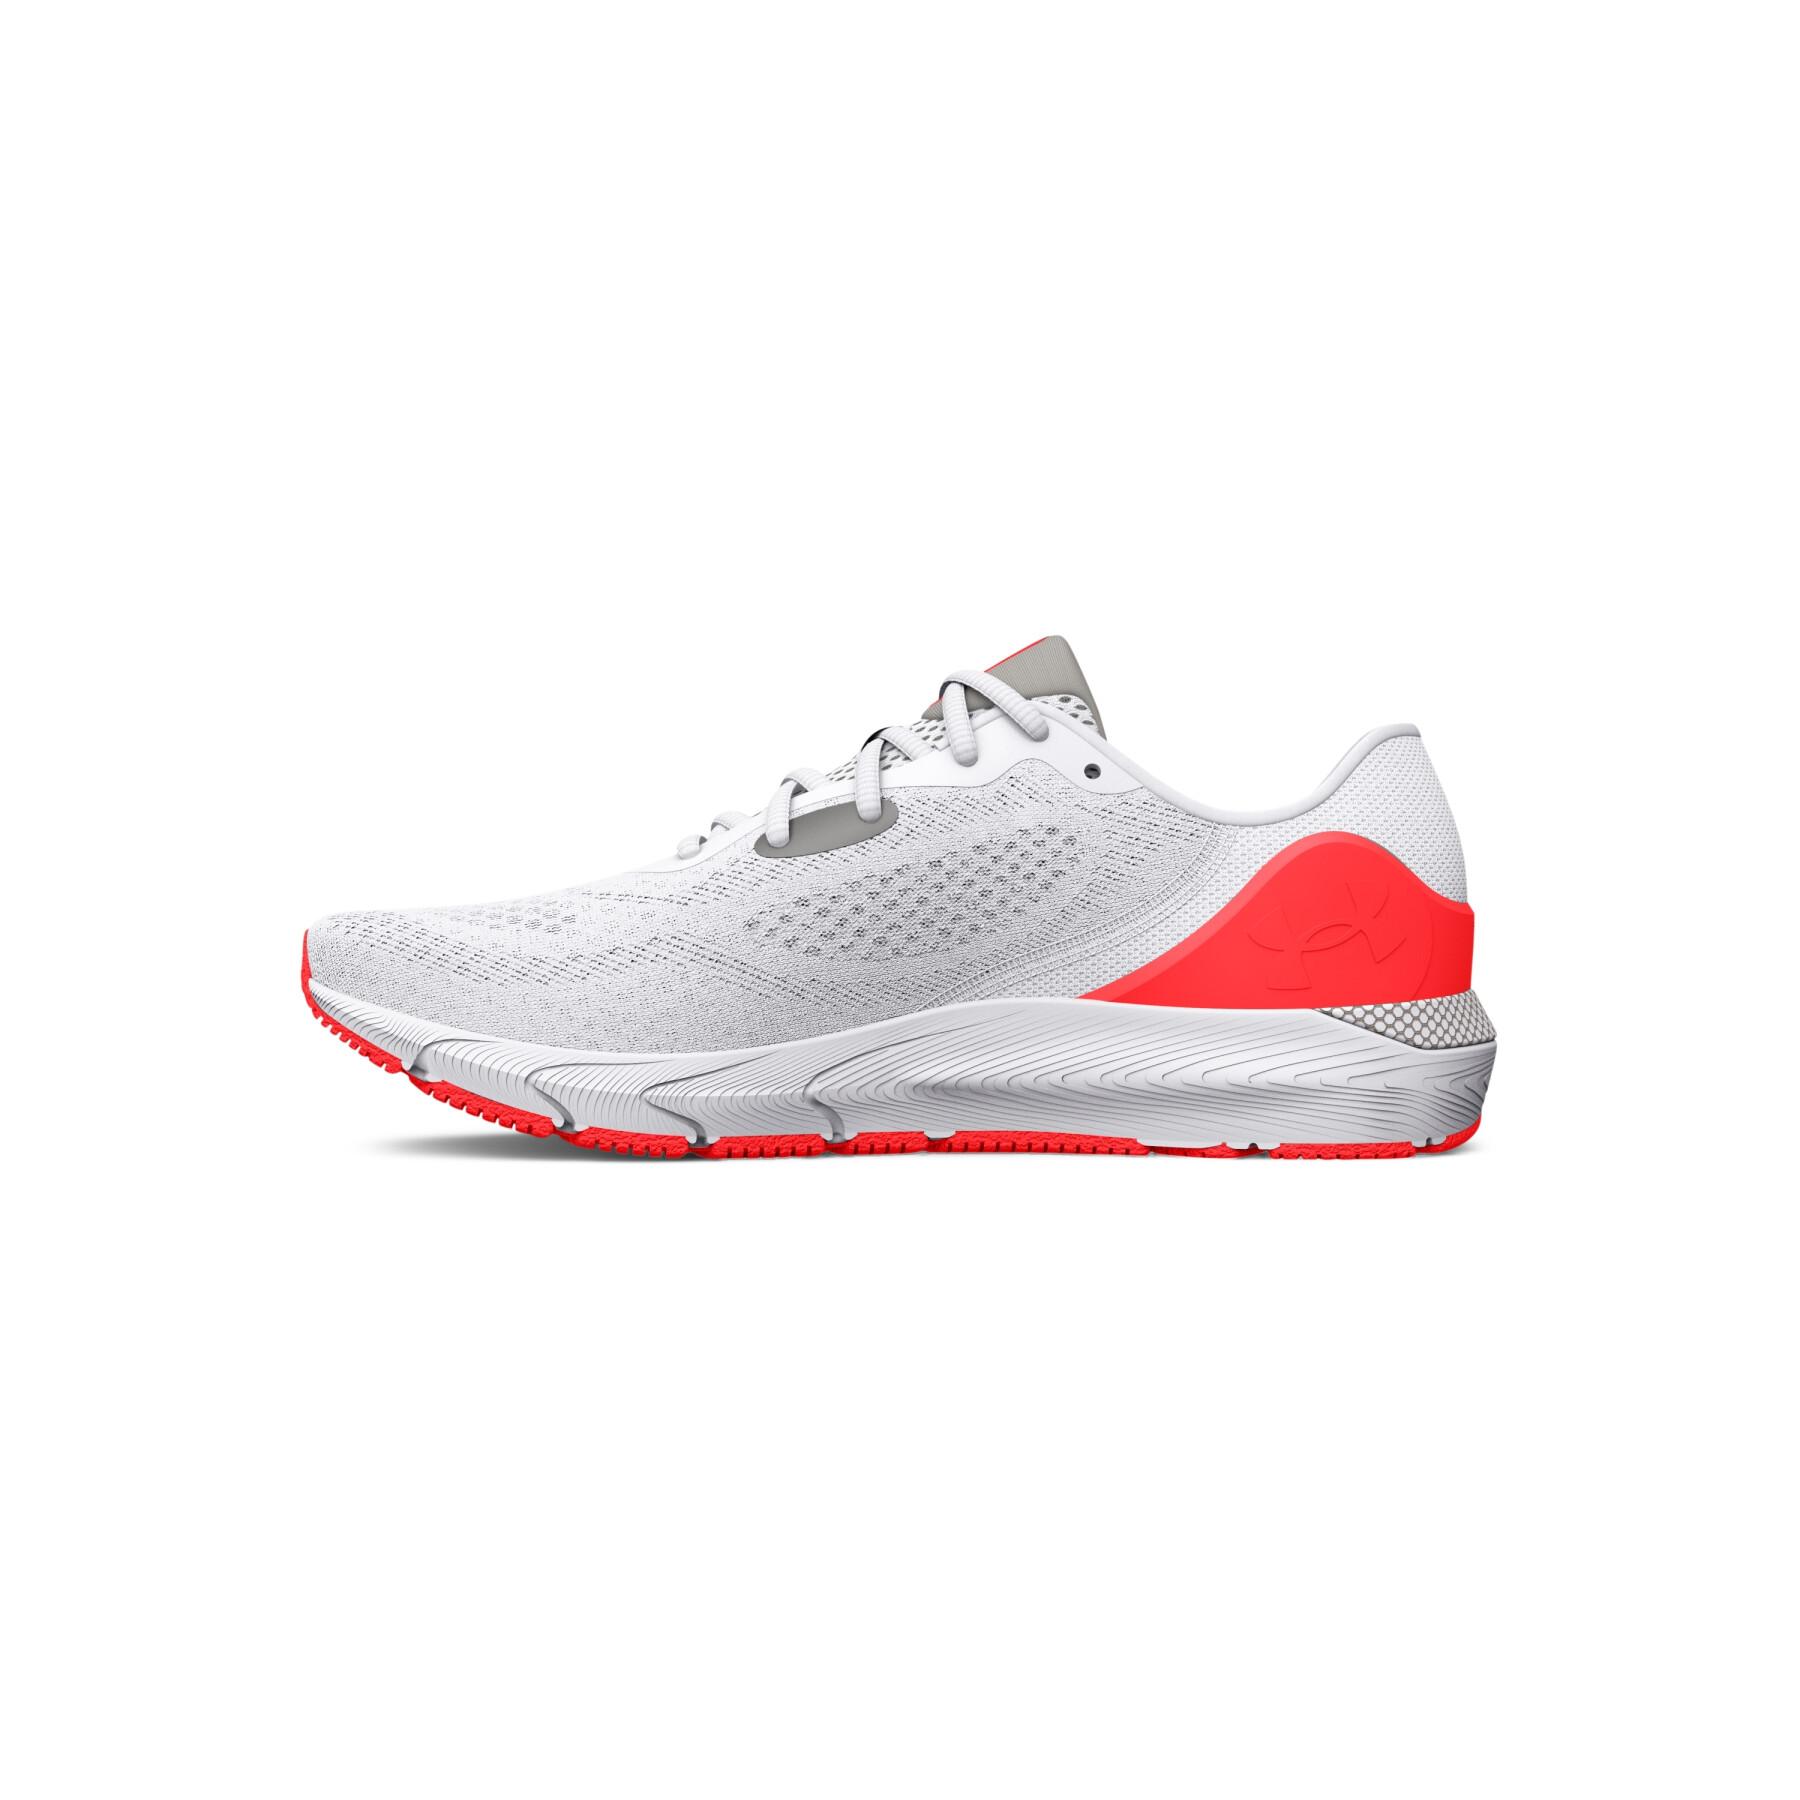 Women's running shoes Under Armour HOVR Sonic 5